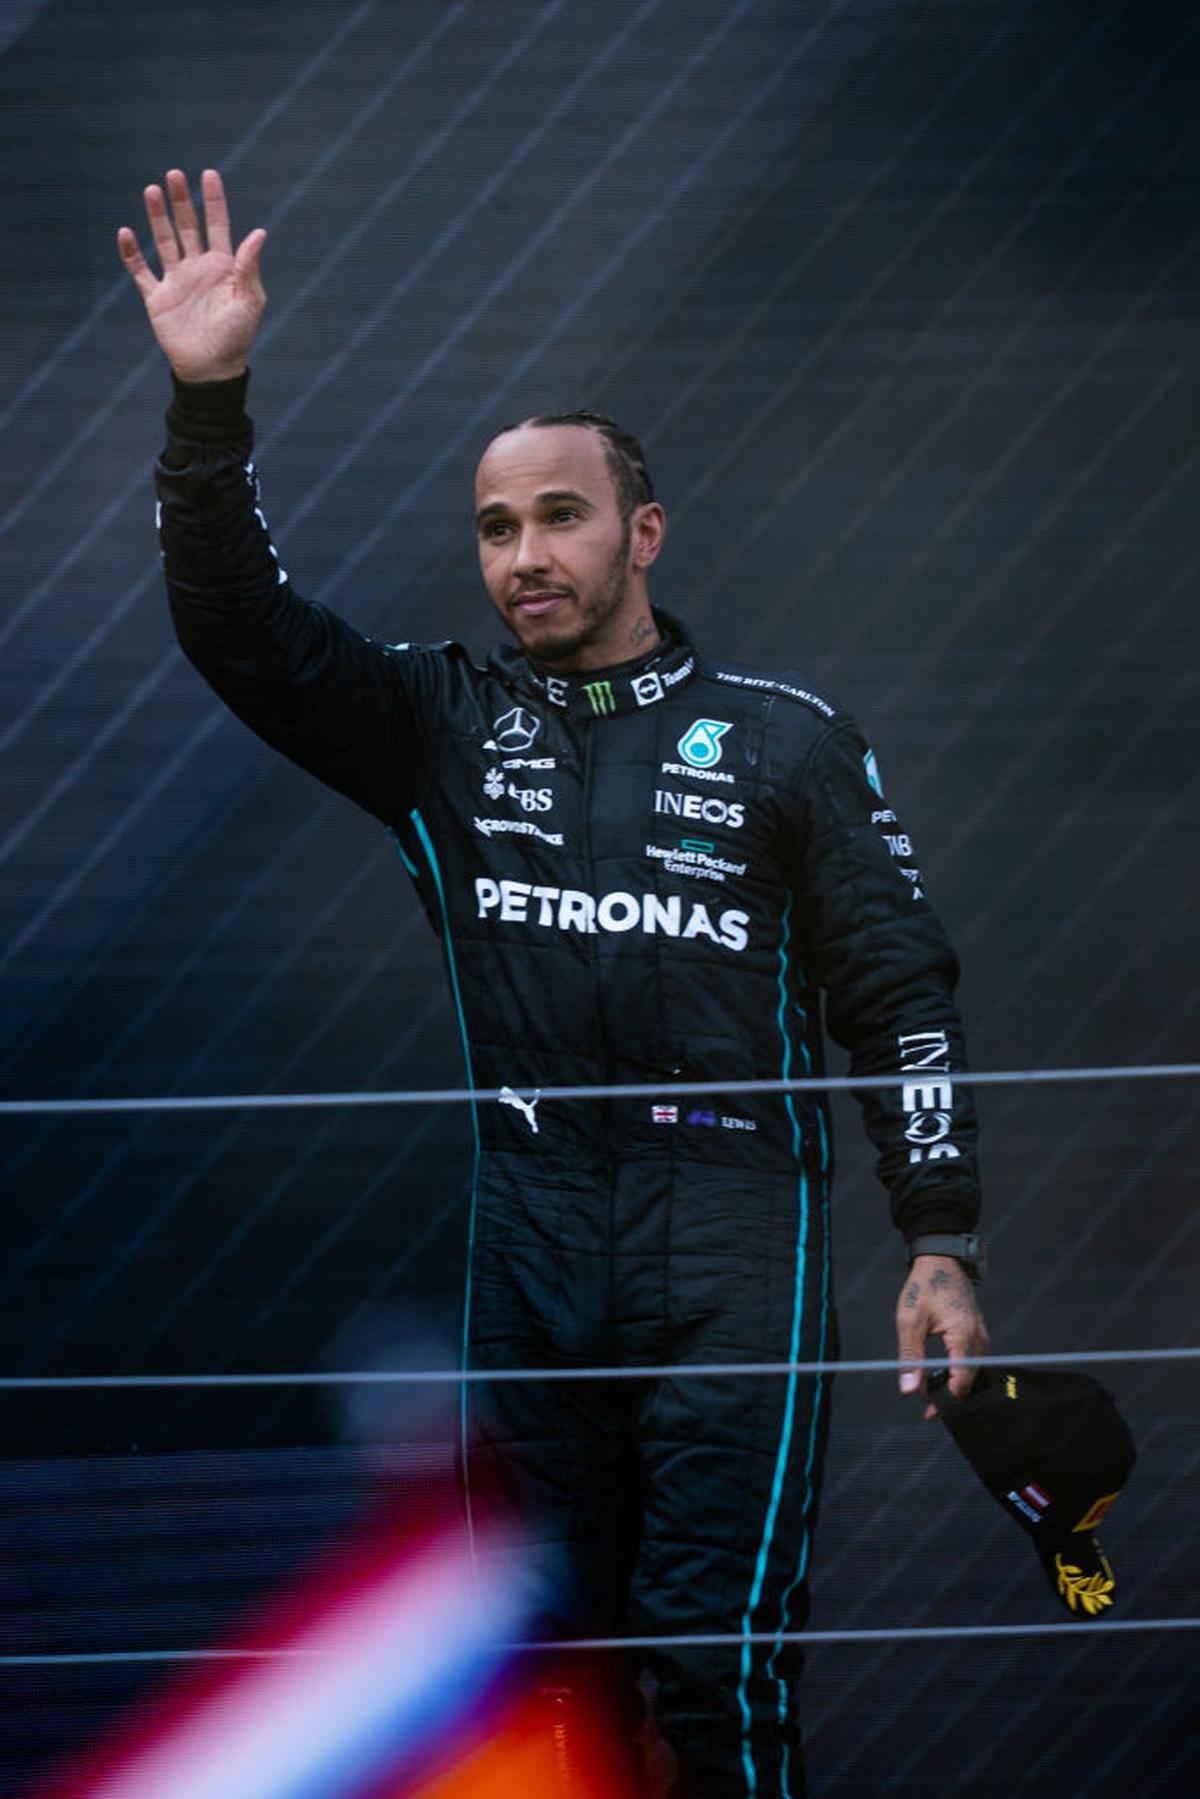 Lewis Hamilton on the podium after winning third place at the Austrian Grand Prix.